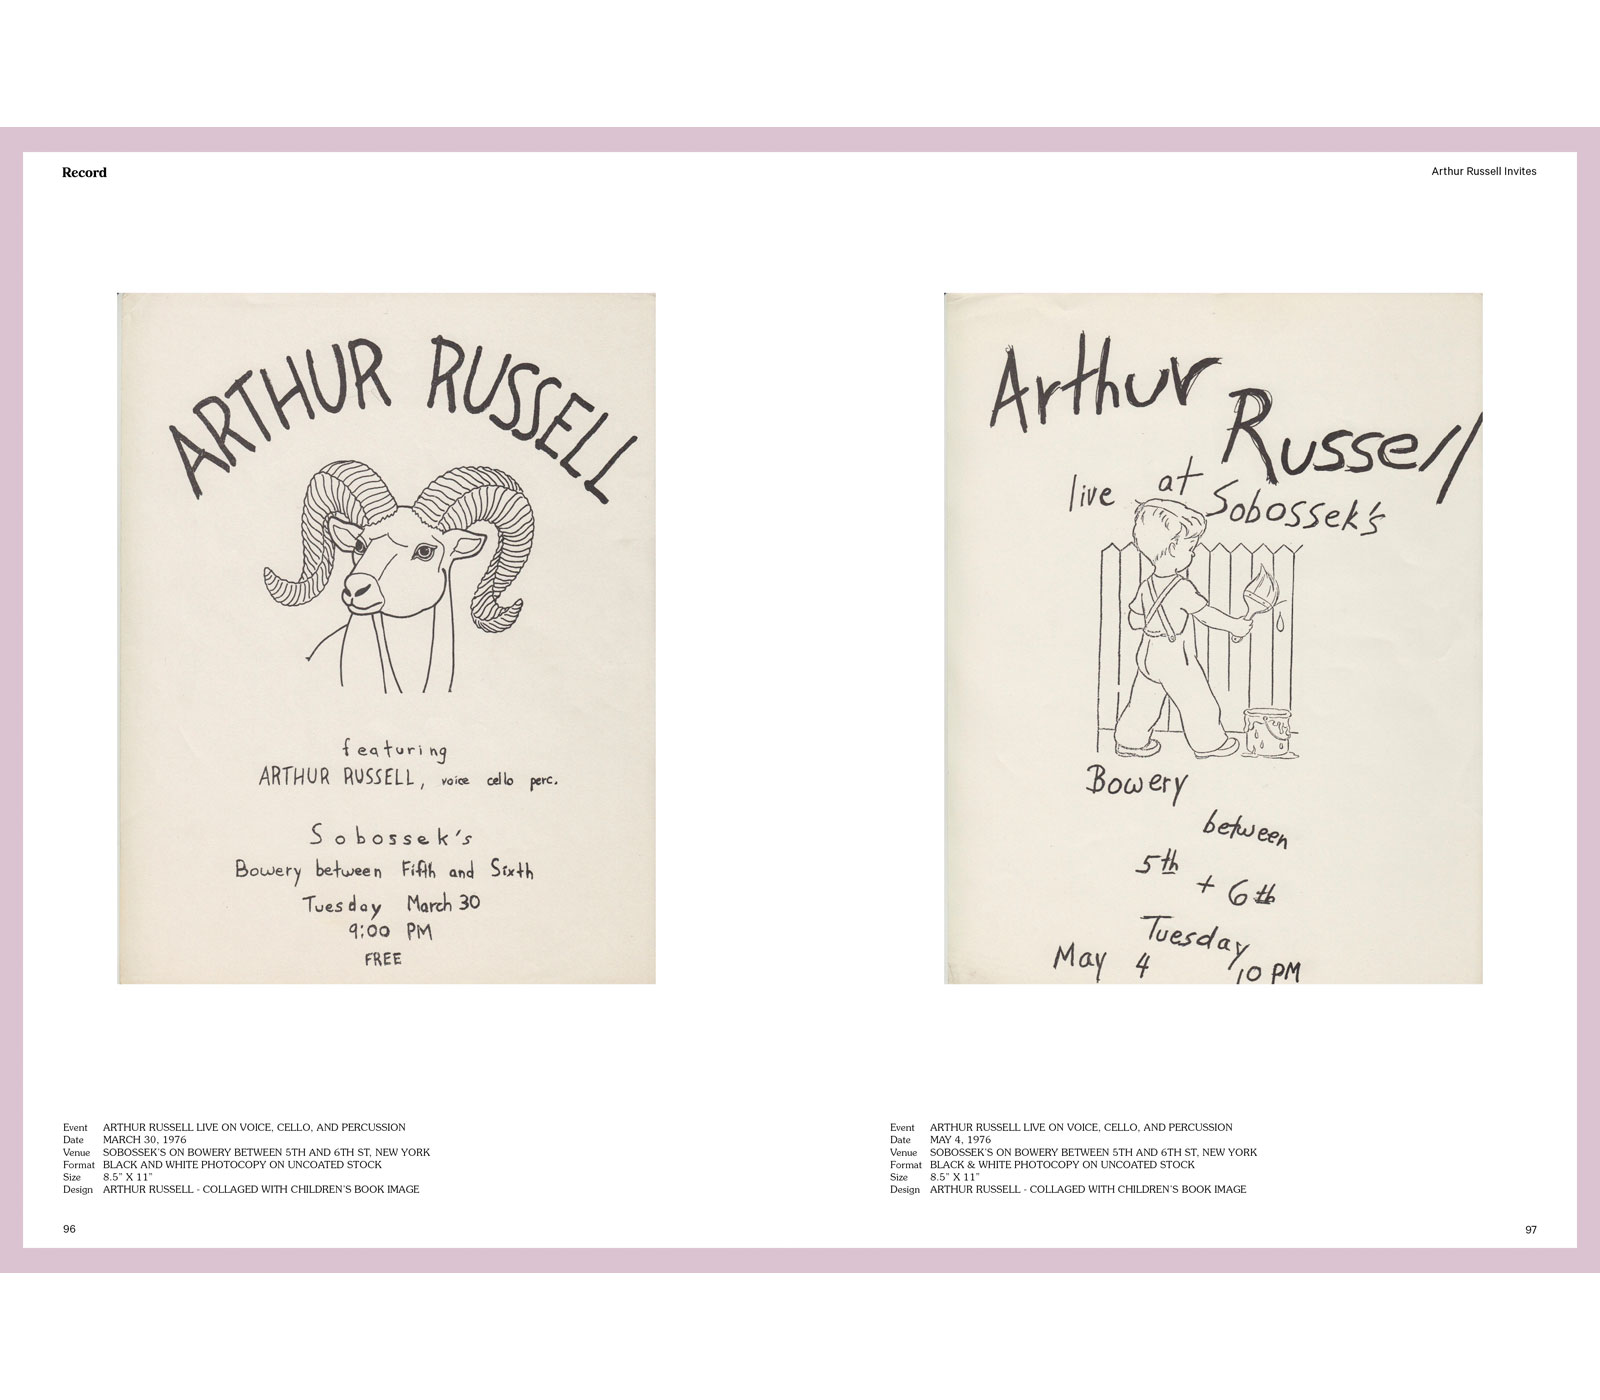 Record Culture Magazine Article featuring Arthur Russell Concert Invites from the Wild Life Archive